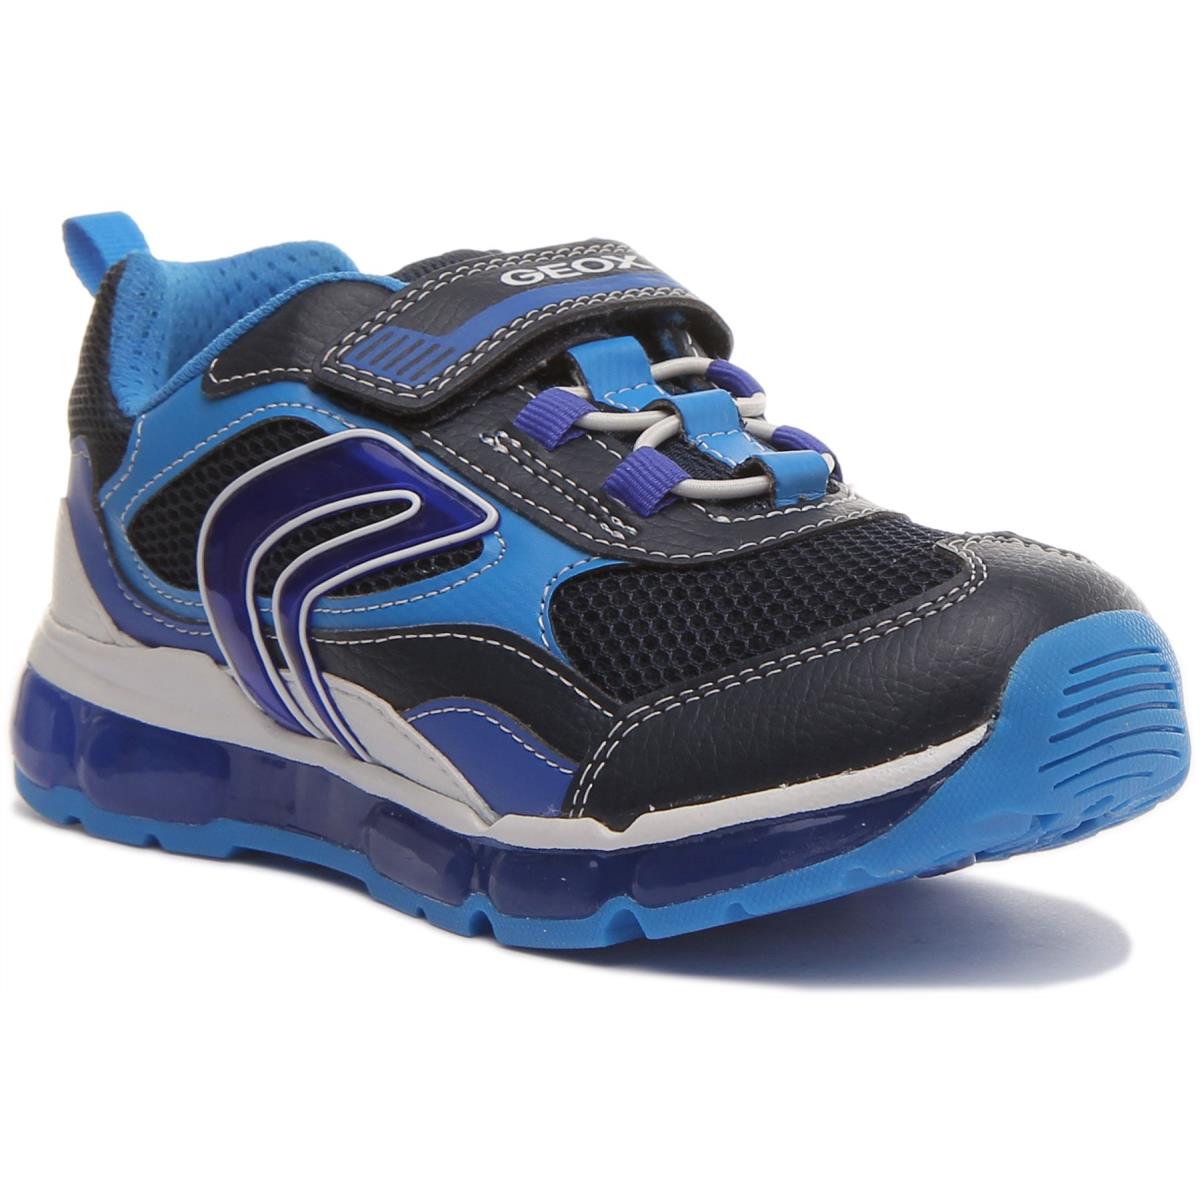 Geox J Android Kids Two Straps Light Up Sneakers In Navy Blue Size US 8 - 4 NAVY BLUE